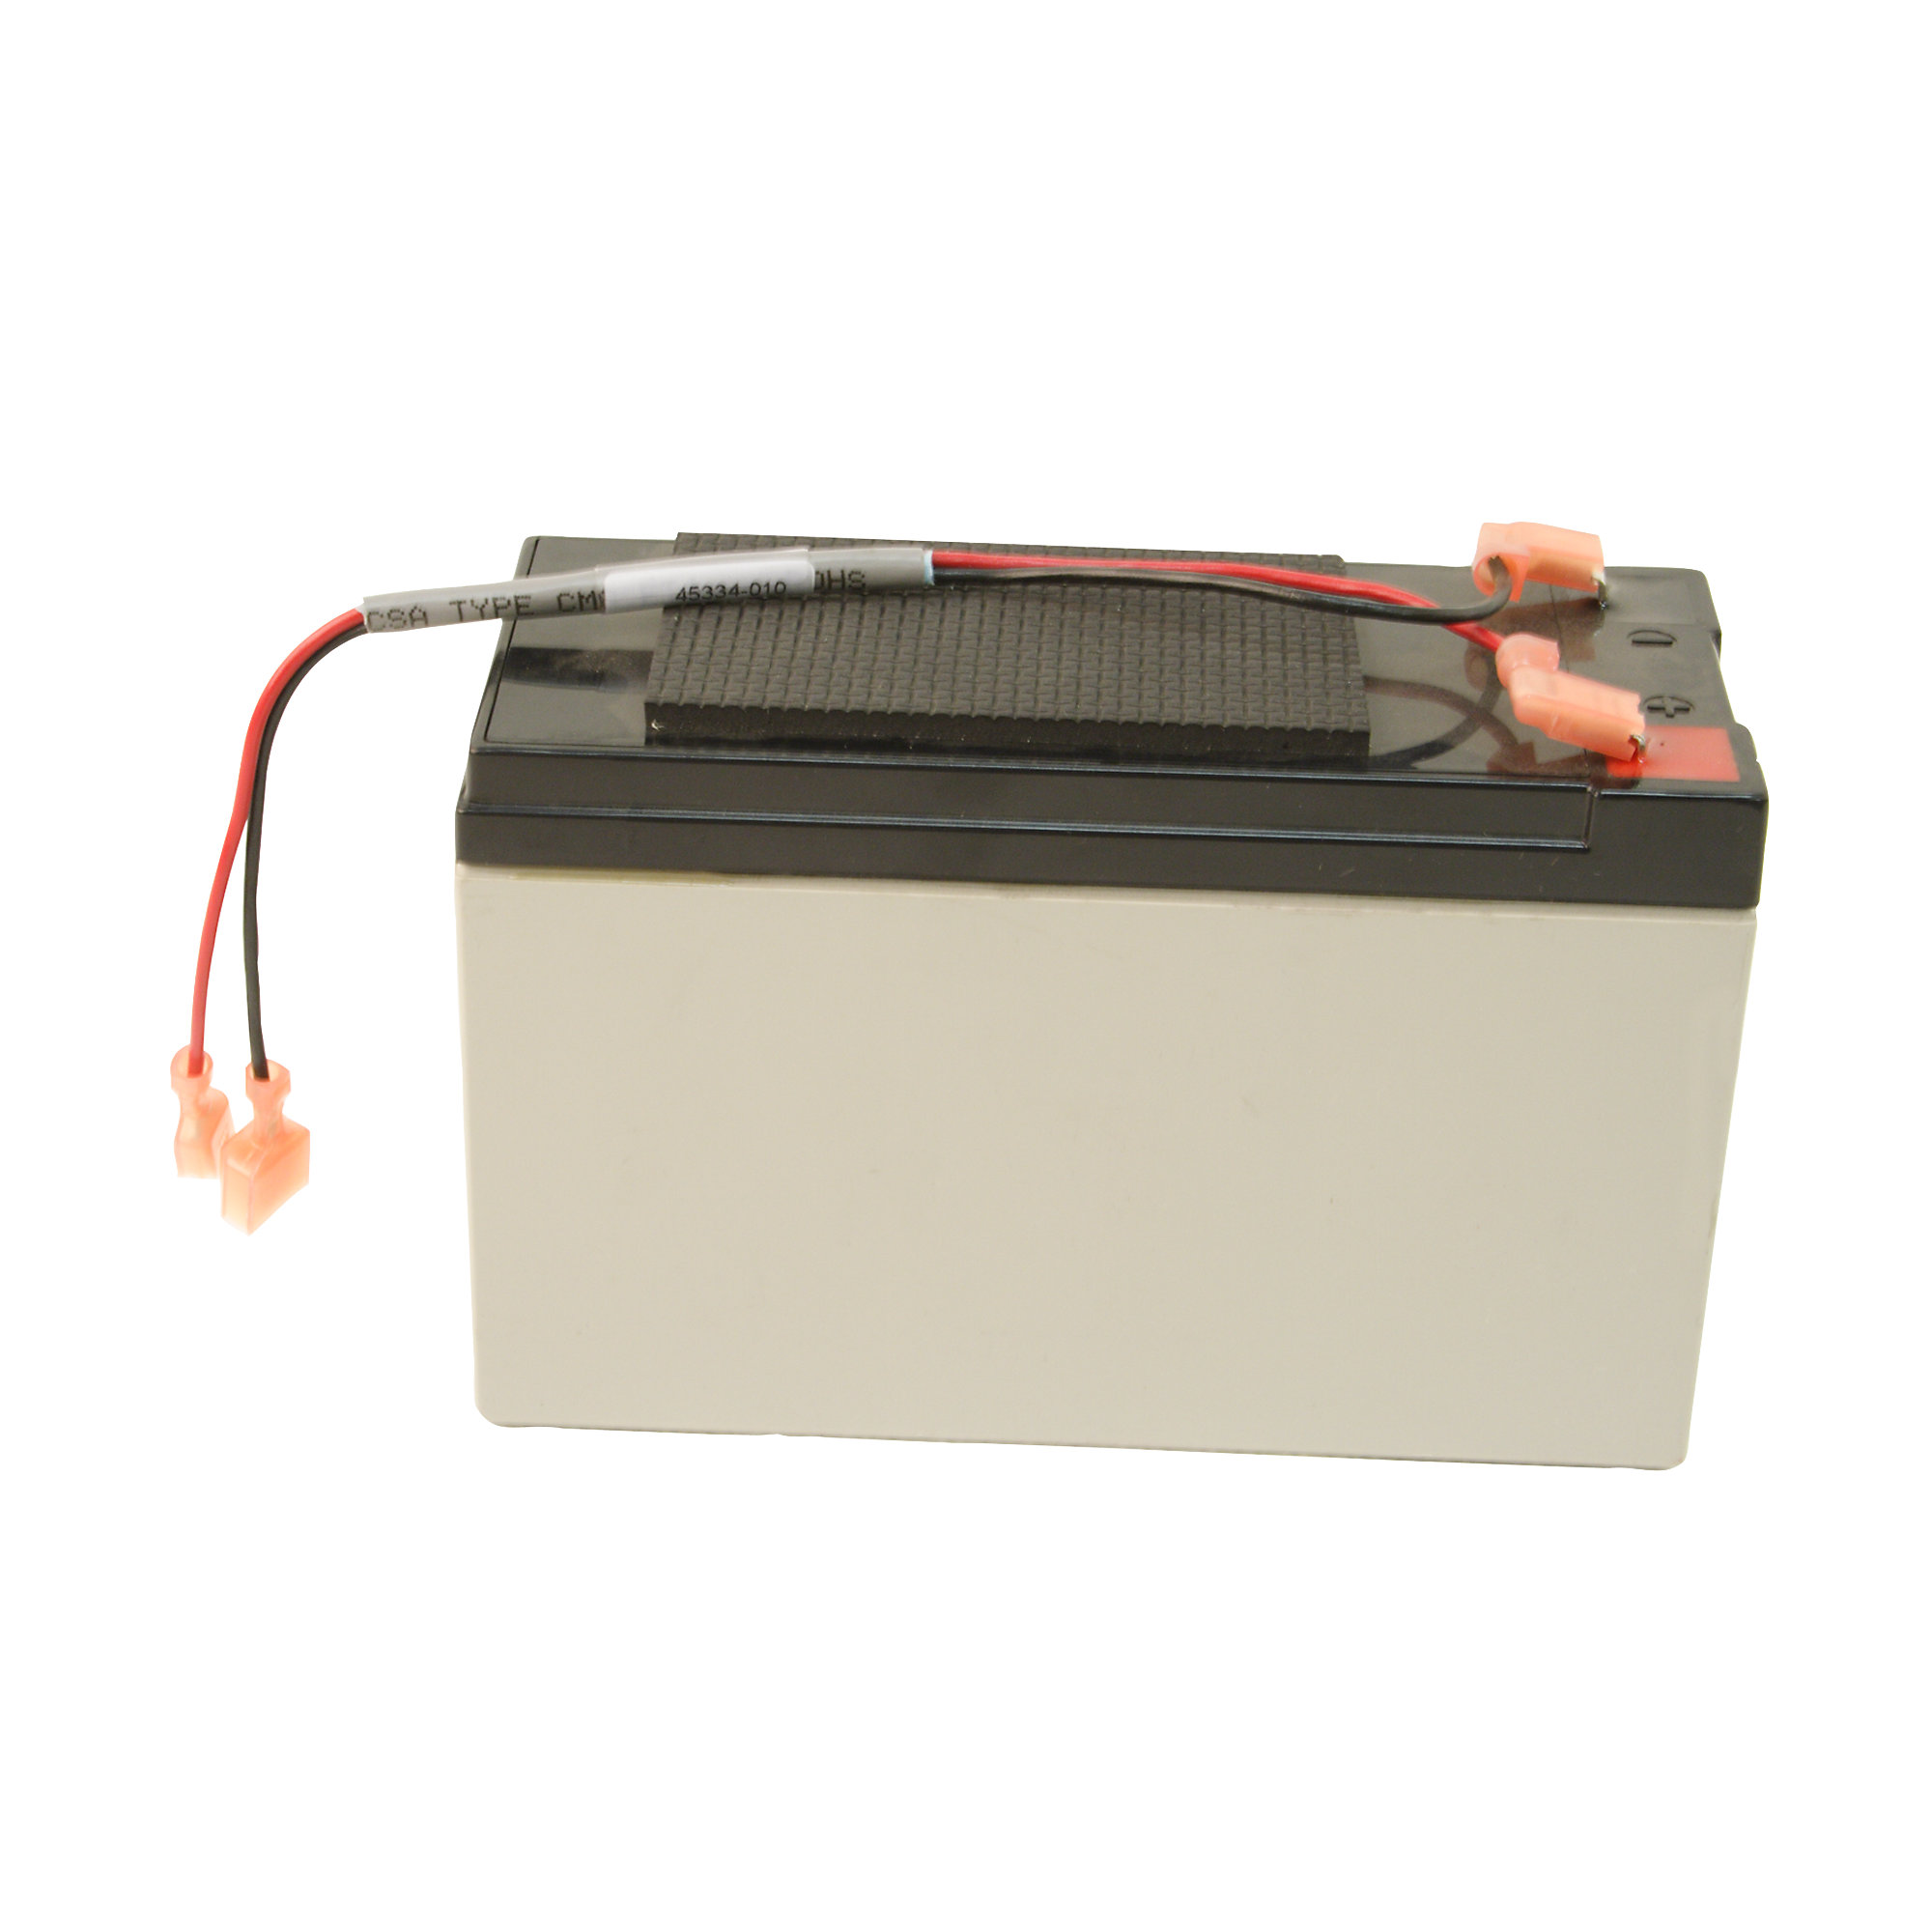 Battery with Cable Assembly, SLA, 12V, 7AH, 6" x 4 1/3" x 2 1/2"